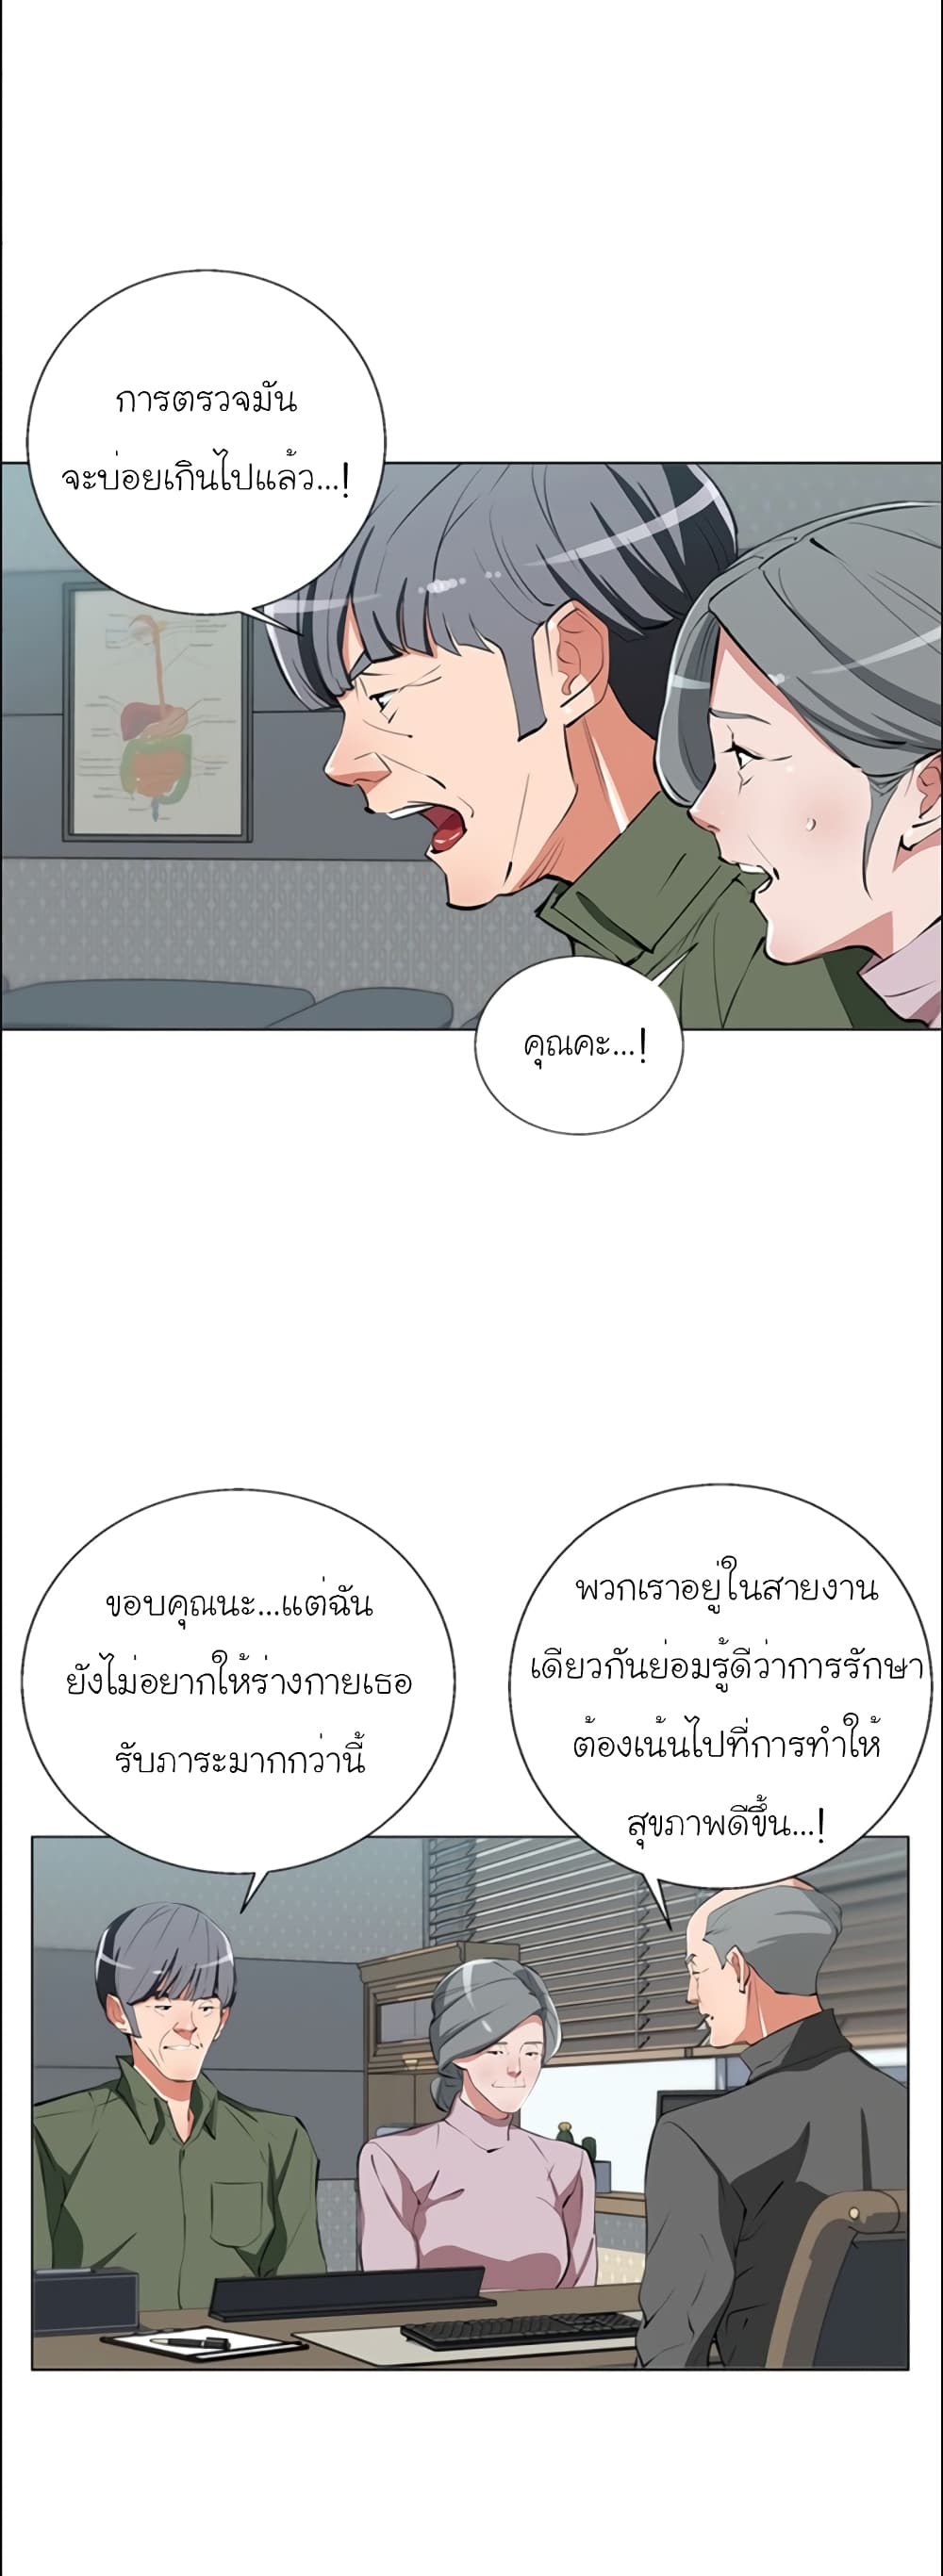 I Stack Experience Through Reading Books ตอนที่ 60 (11)